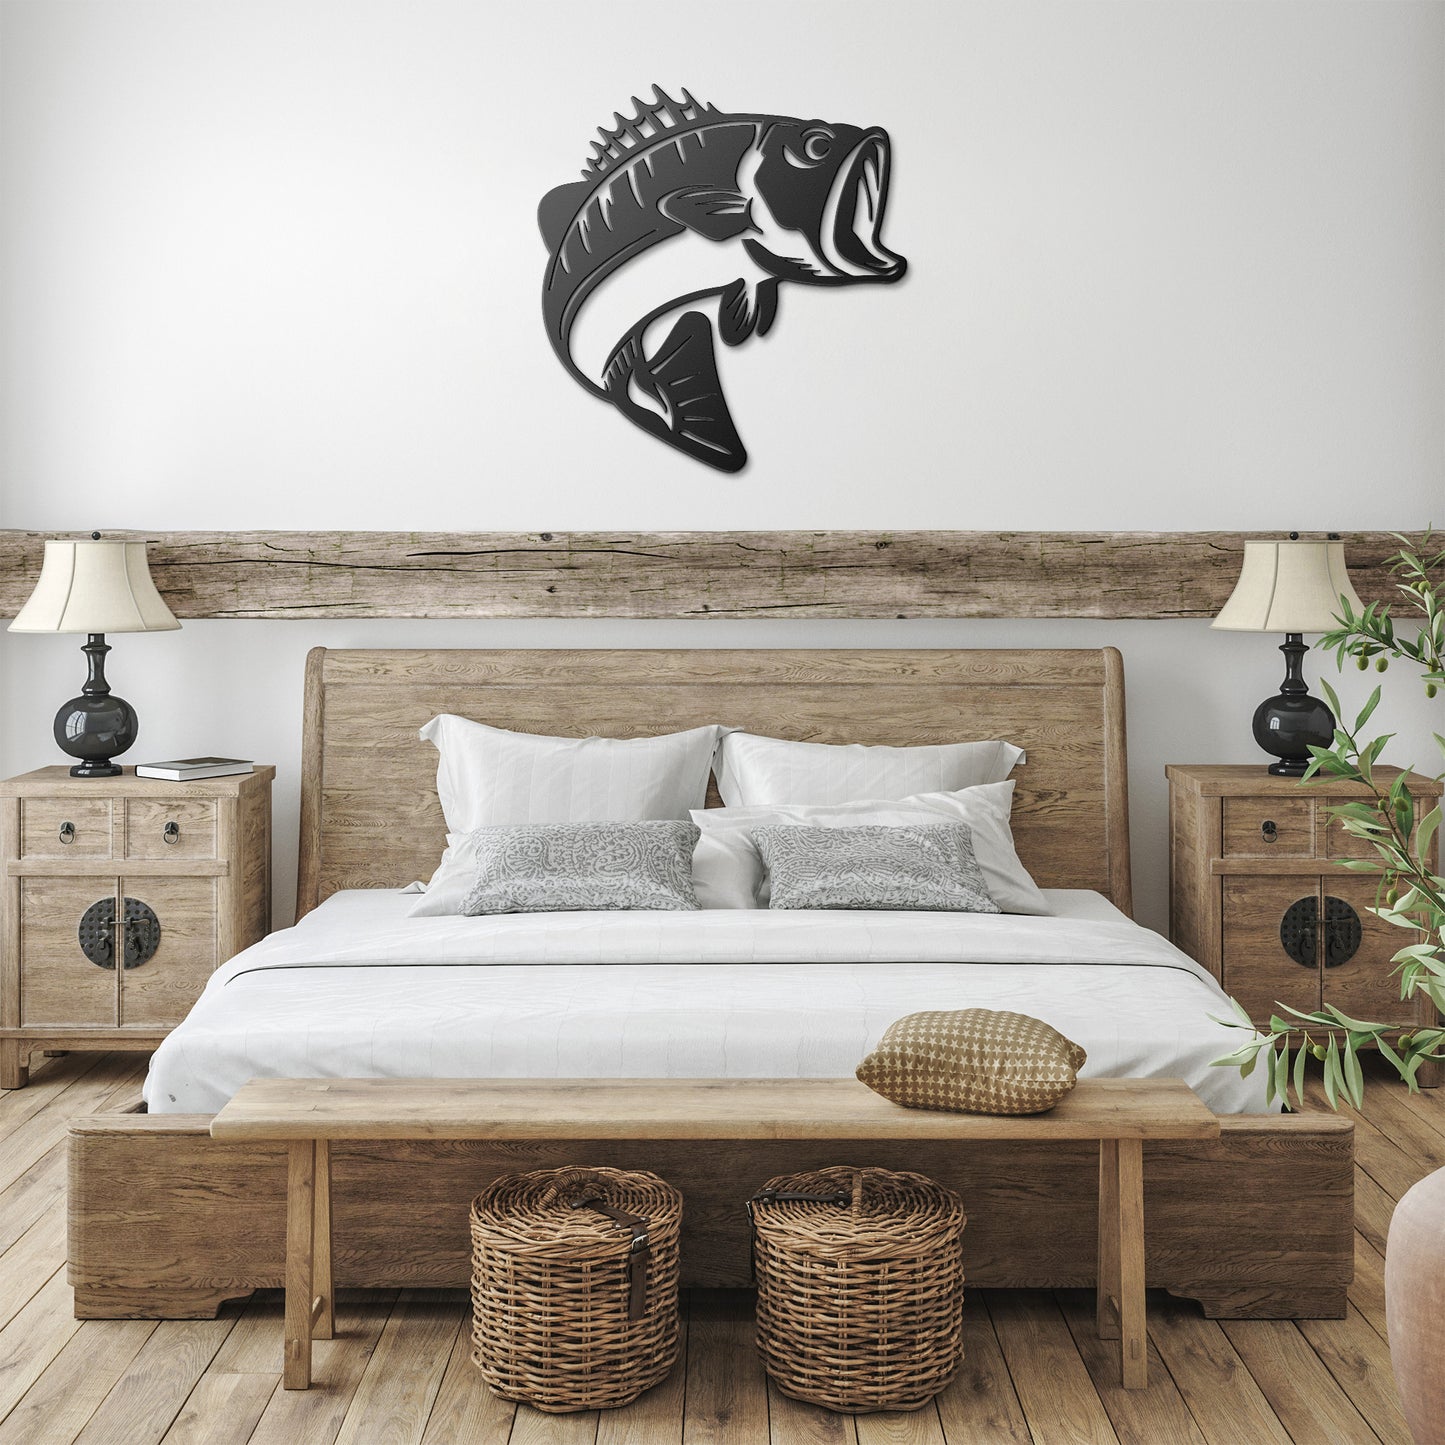 Large Mouth Bass Jumping Metal Art - Fishing Enthusiast's Delight - USA